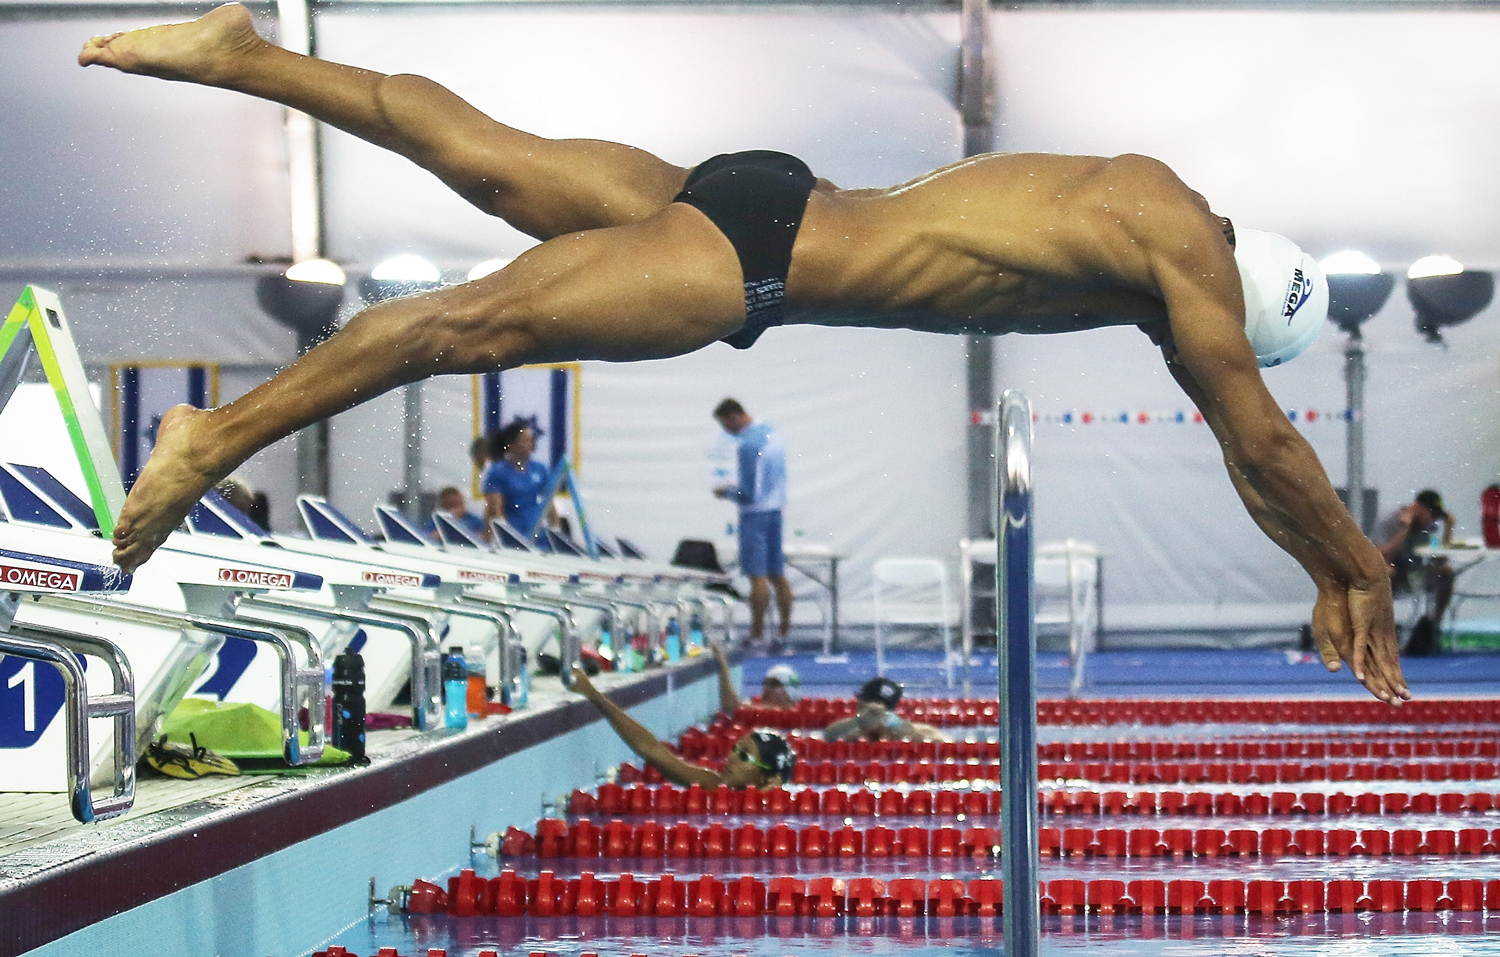 Rami Anis, an Olympic refugee team swimmer from Syria, dives while training at the Olympic Aquatics Stadium ahead of the opening ceremonies in Rio de Janeiro on July 28, 2016. (Mario Tama—Getty Images)